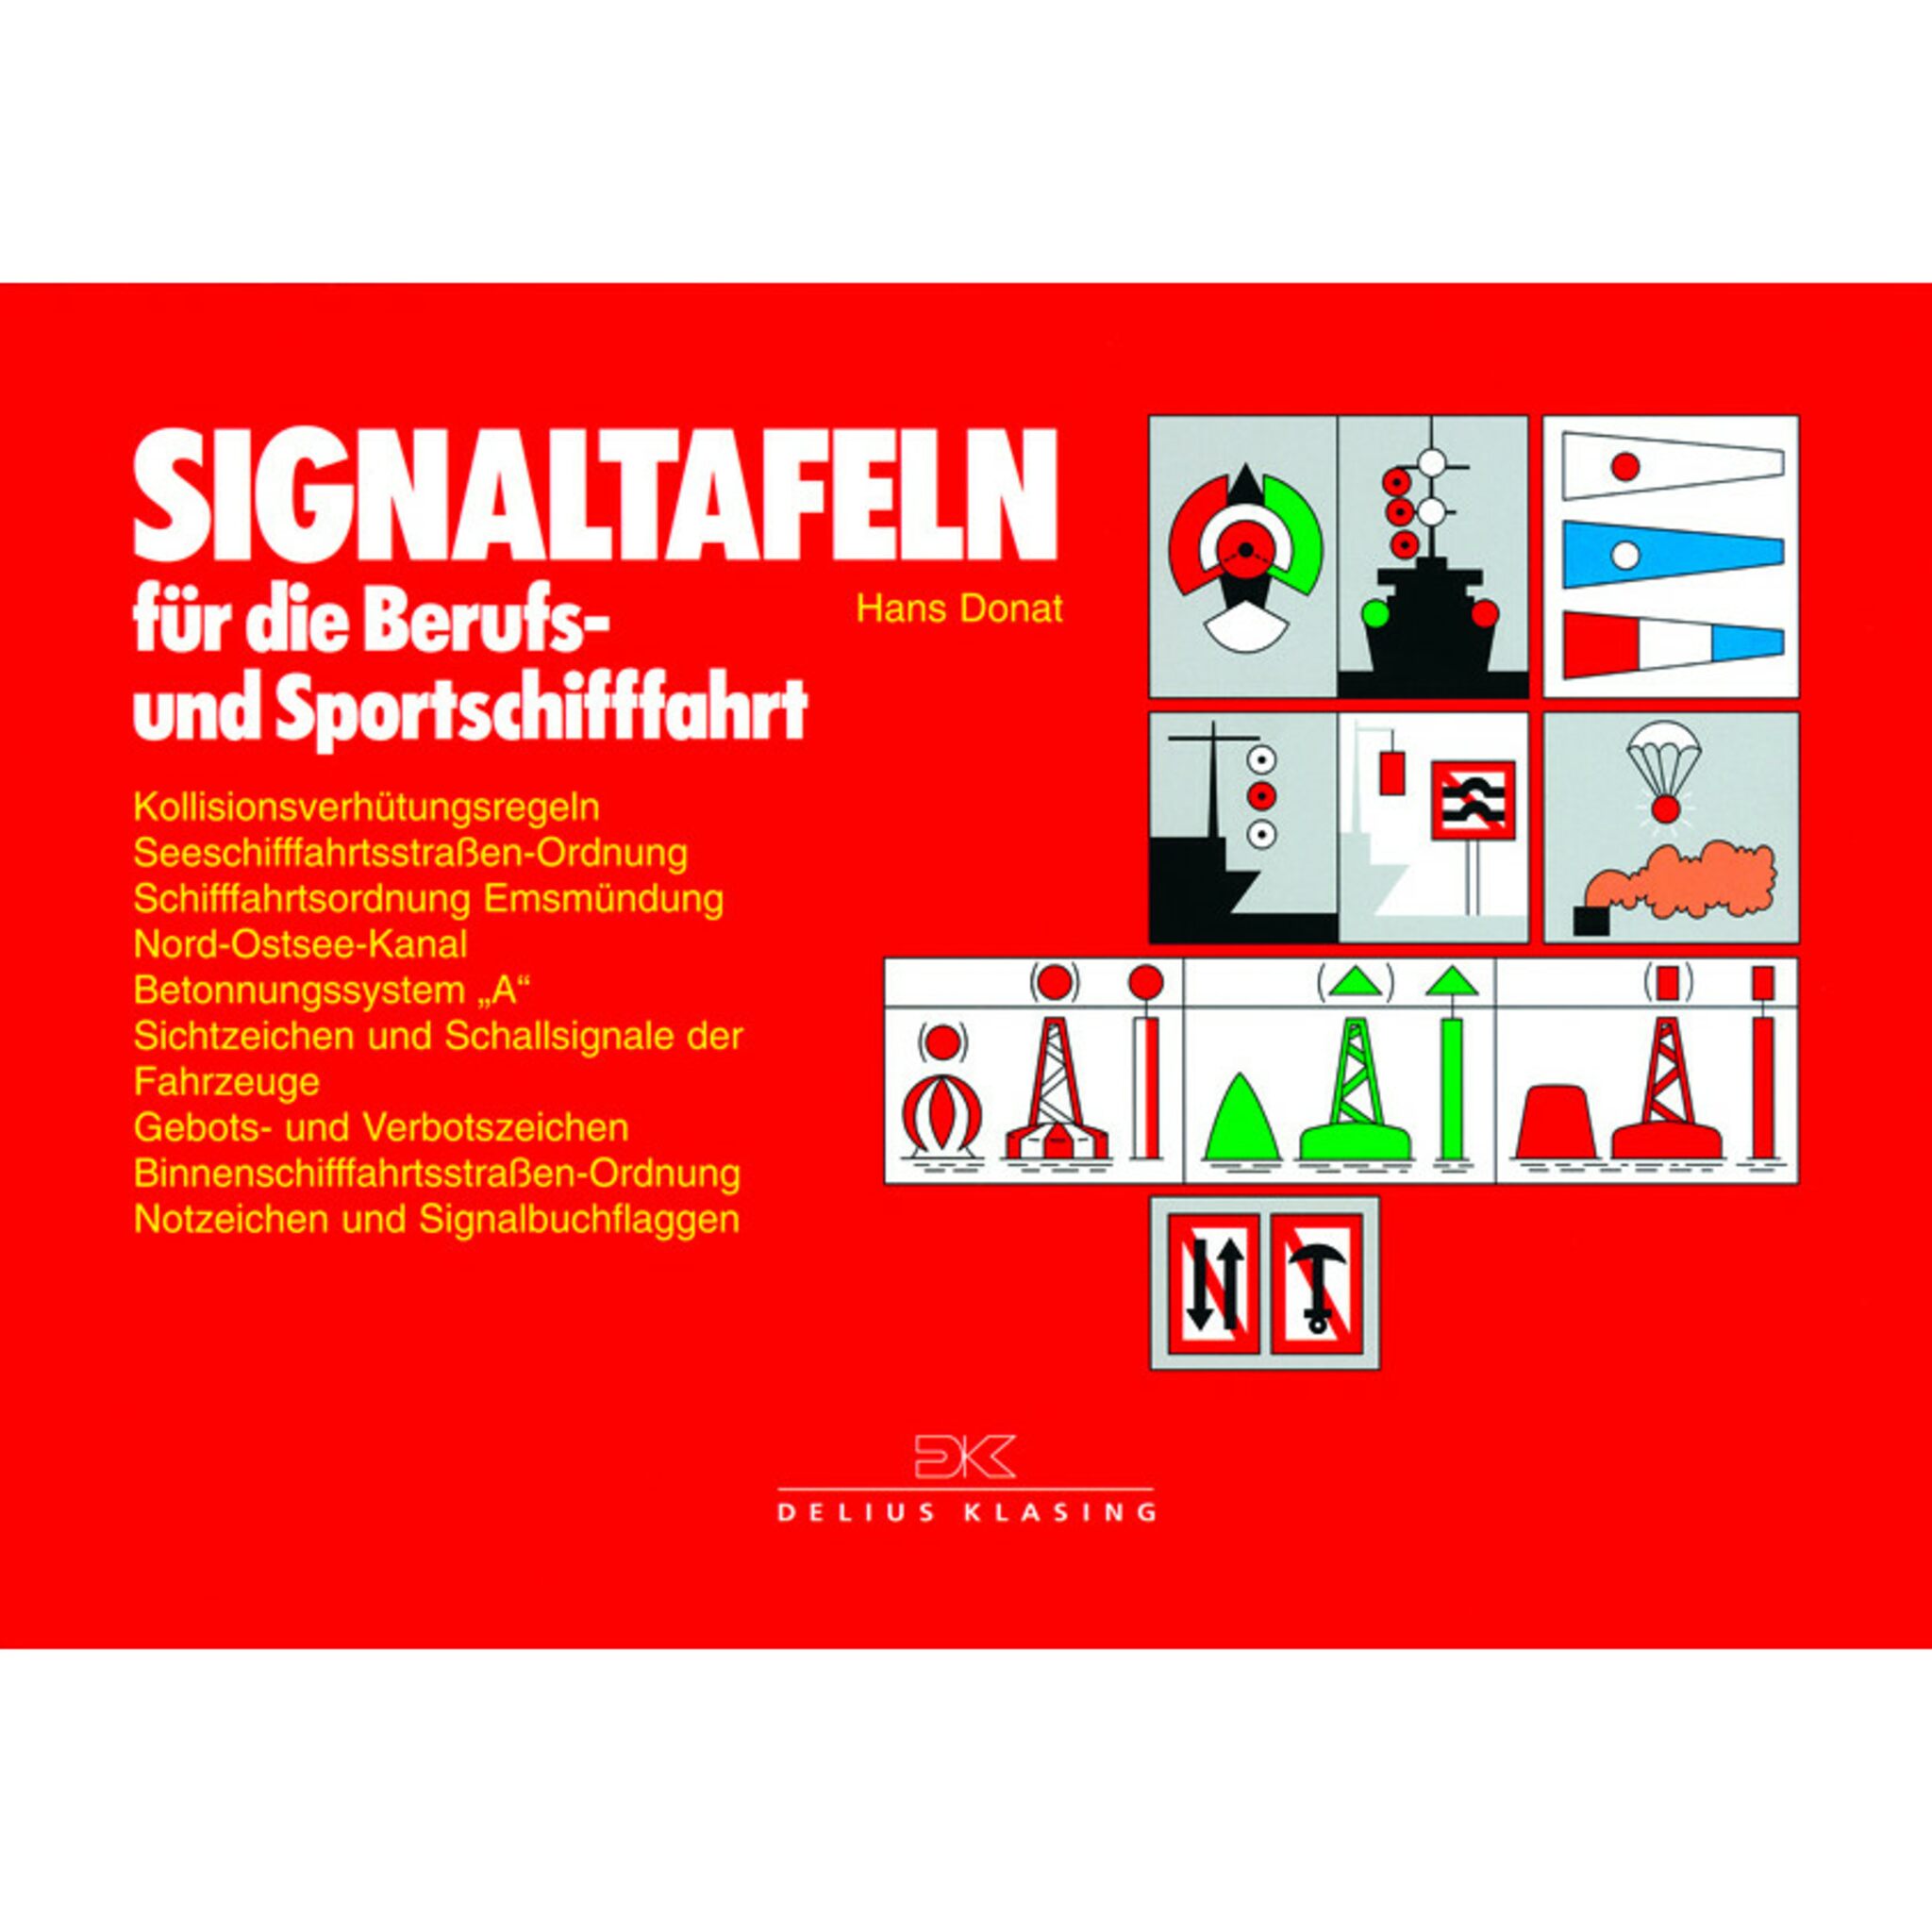 Delius Klasing SIGNAL TABLE for professional and recreational navigation